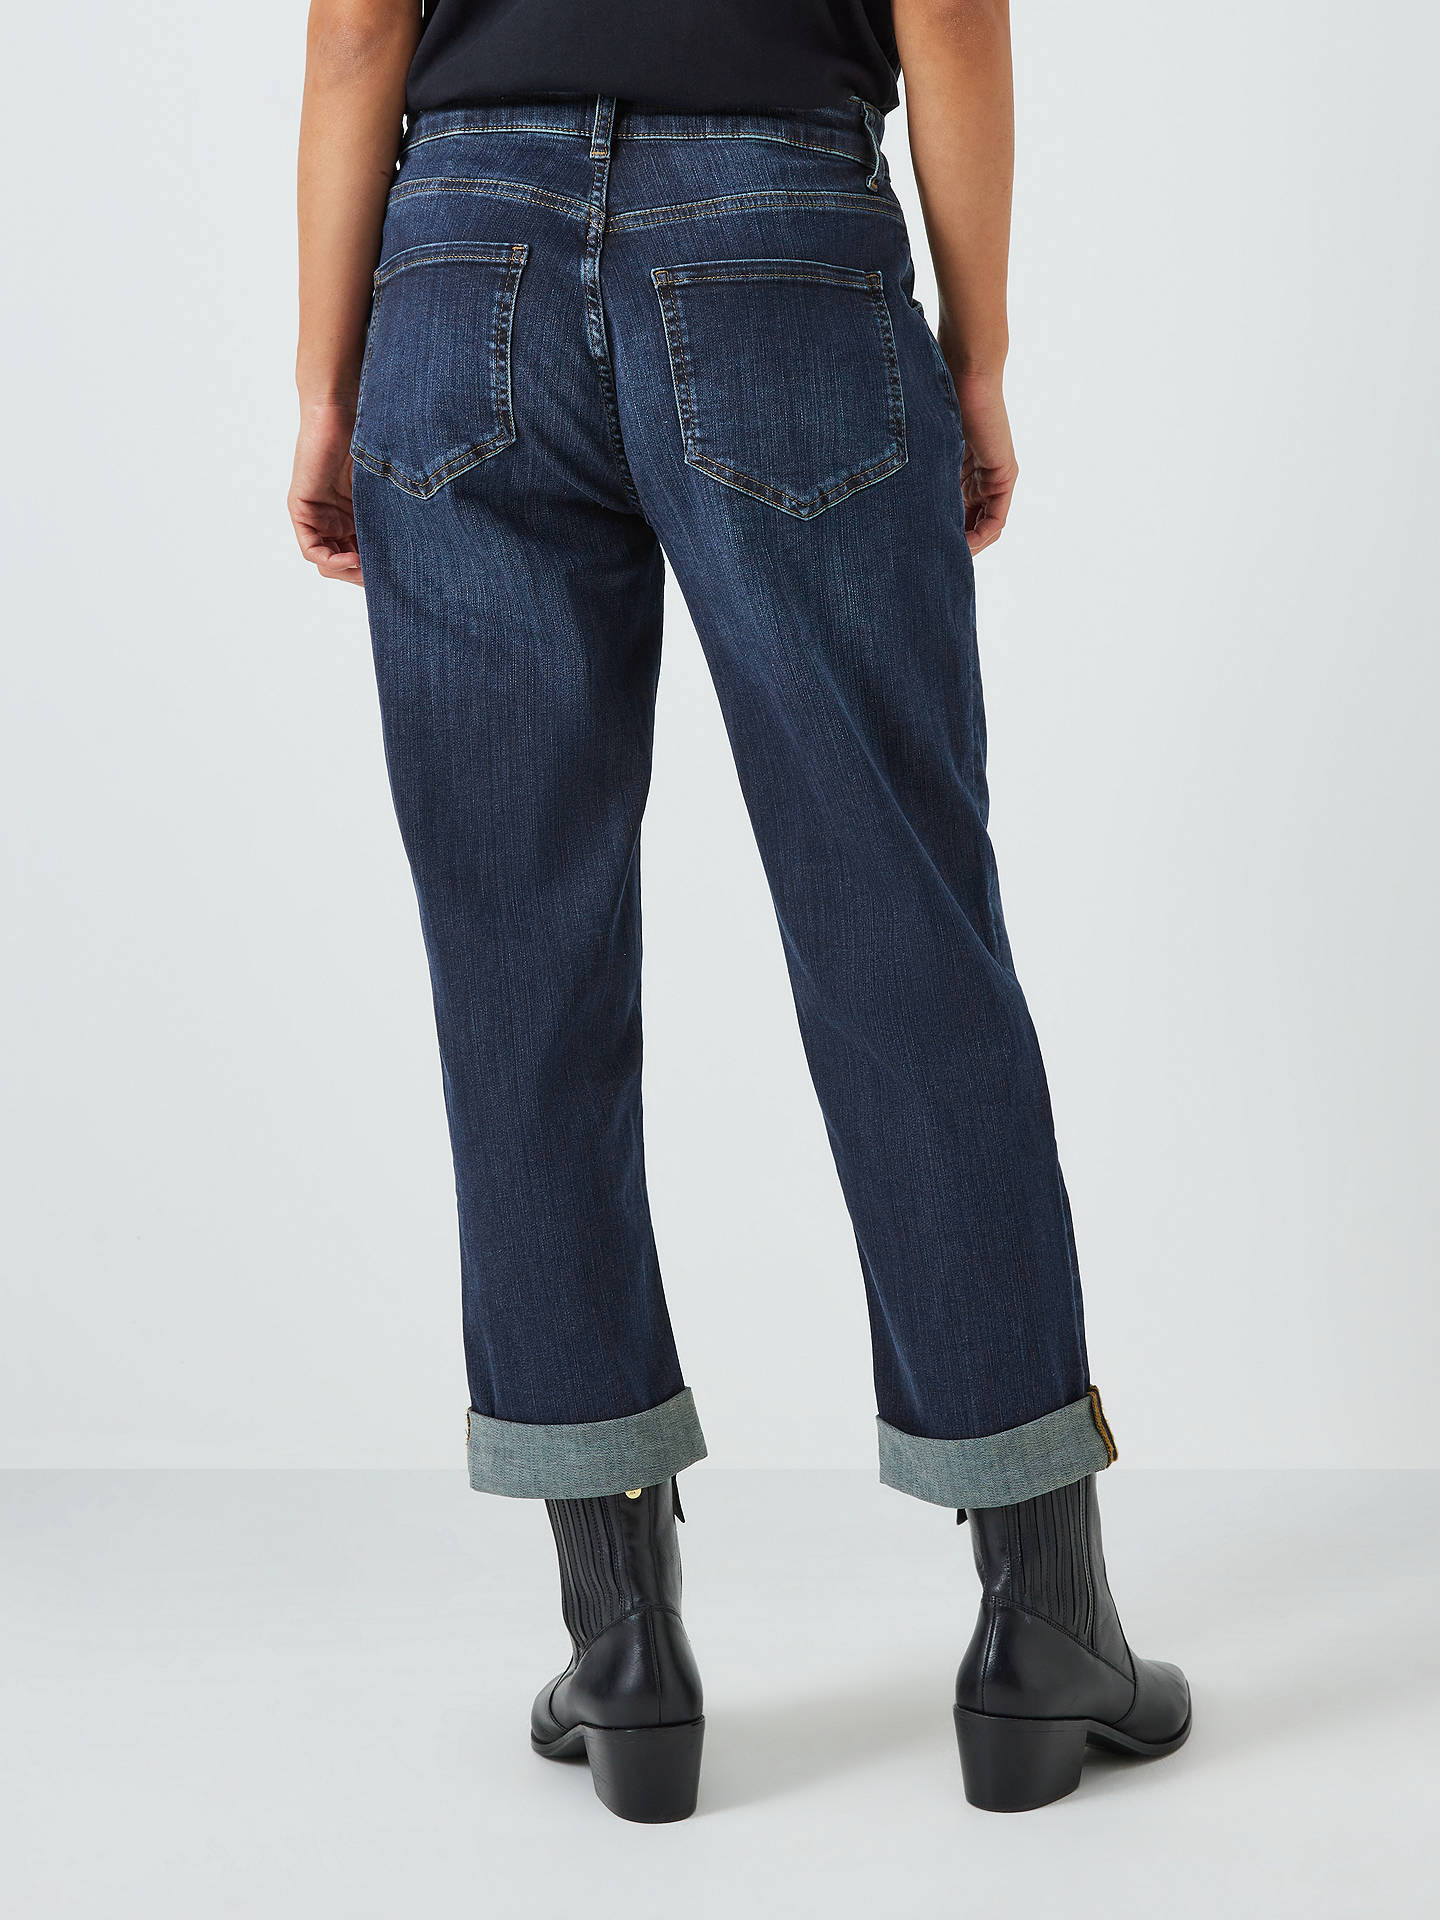 AND/OR Venice Beach Boyfriend Jeans, Azurite Blue at John Lewis & Partners